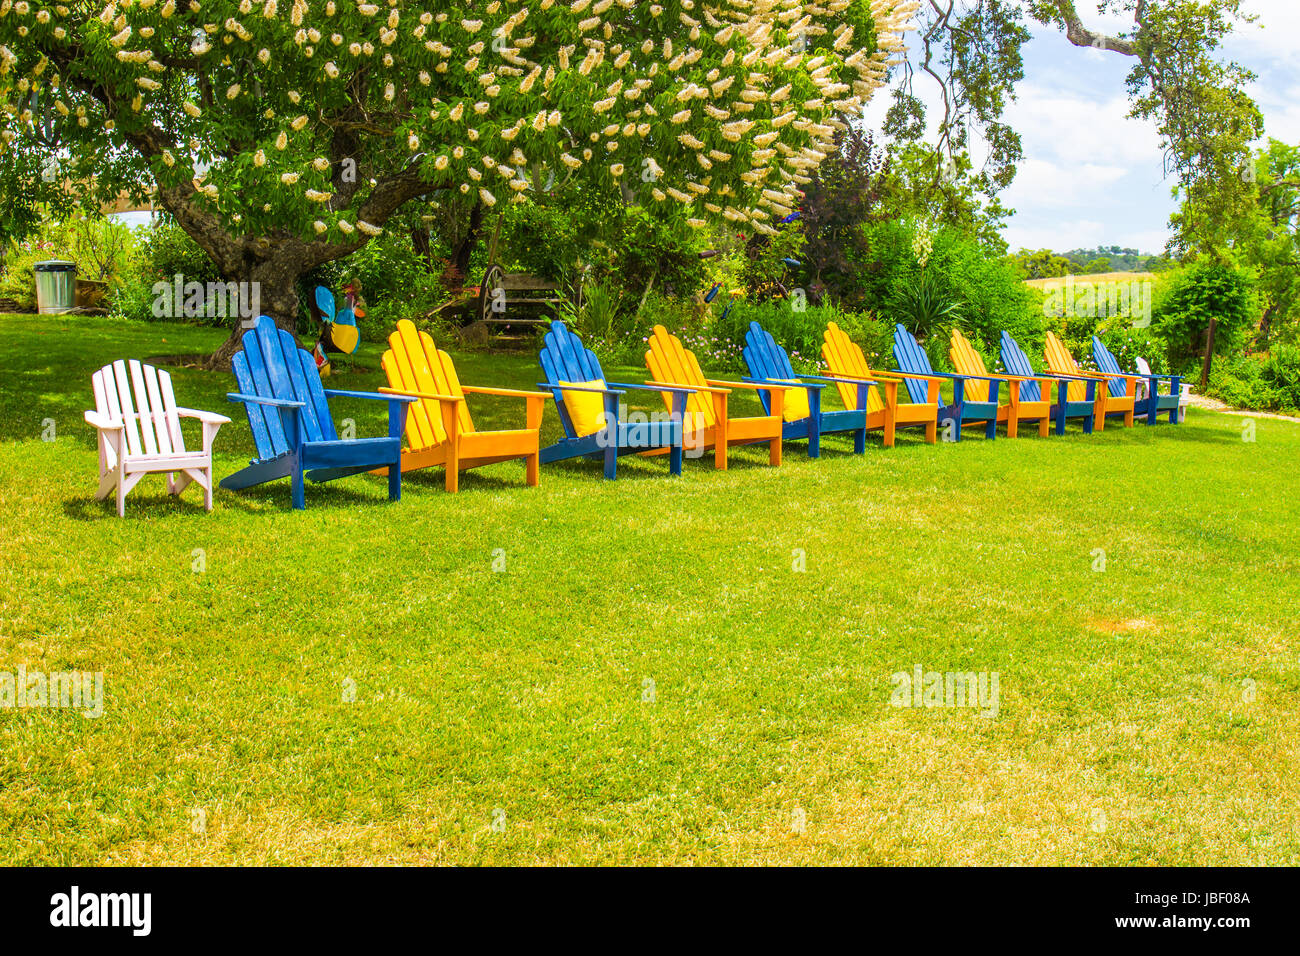 Colorful Lawn Chairs Stock Photos Colorful Lawn Chairs Stock